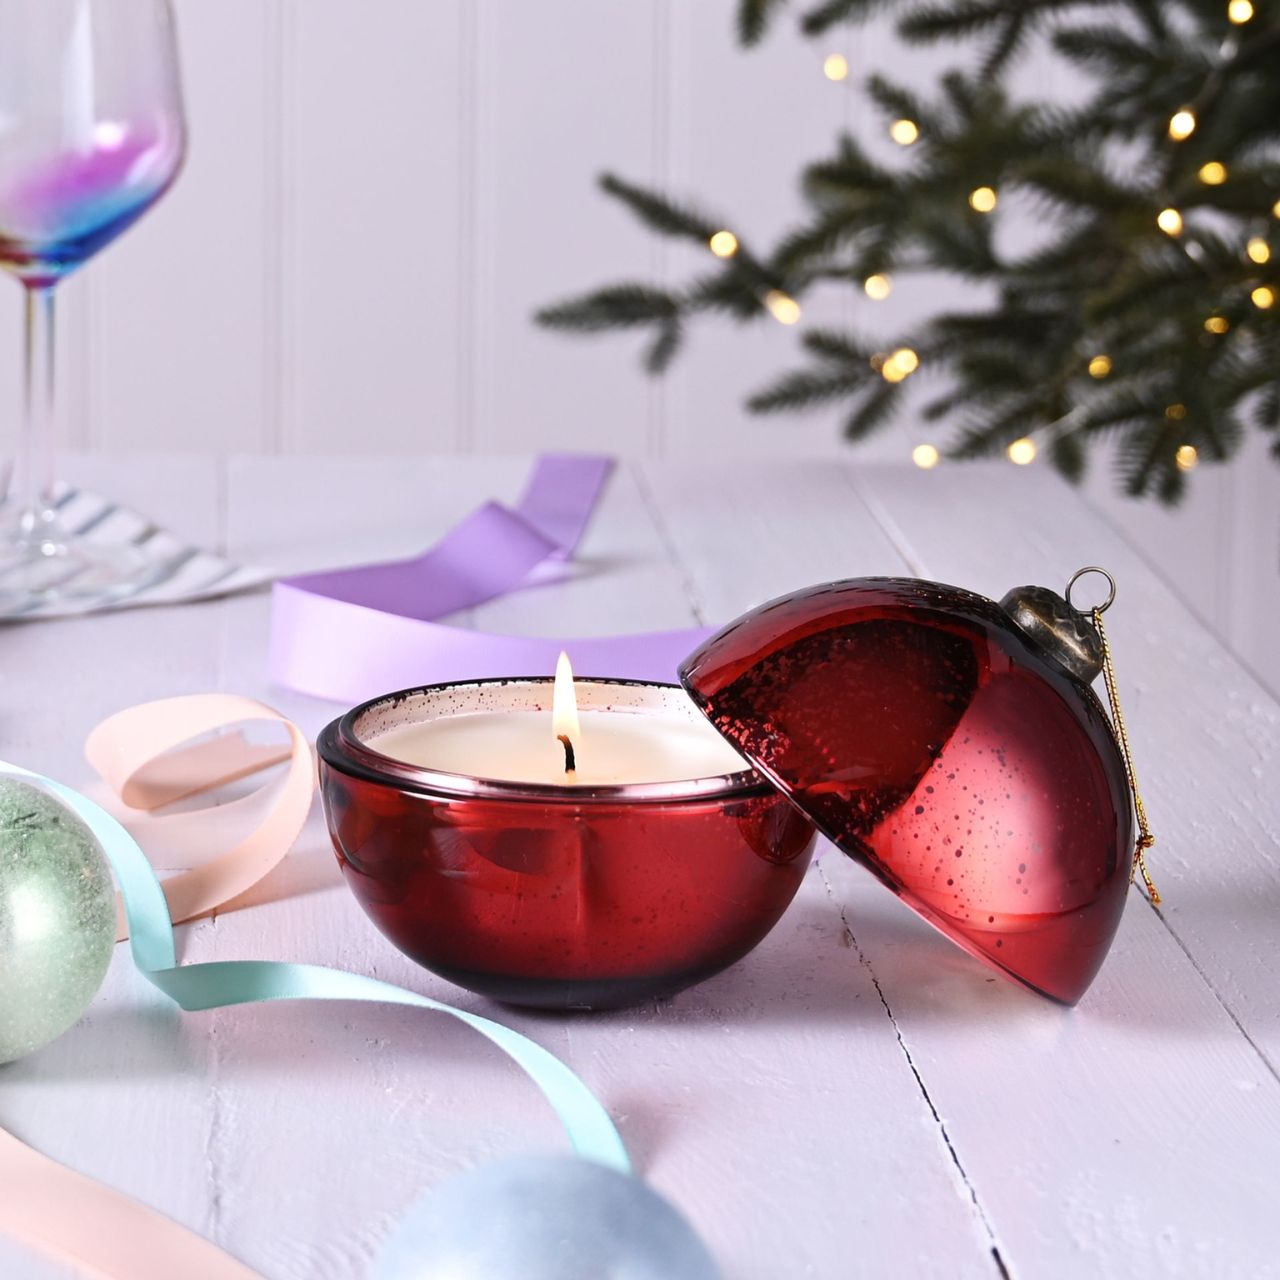 Red Mulled Wine Fragranced Glass Bauble Candle  A Mulled Wine fragranced glass bauble candle.  This aromatic candle makes an eye-catching addition to homes during the festive season.